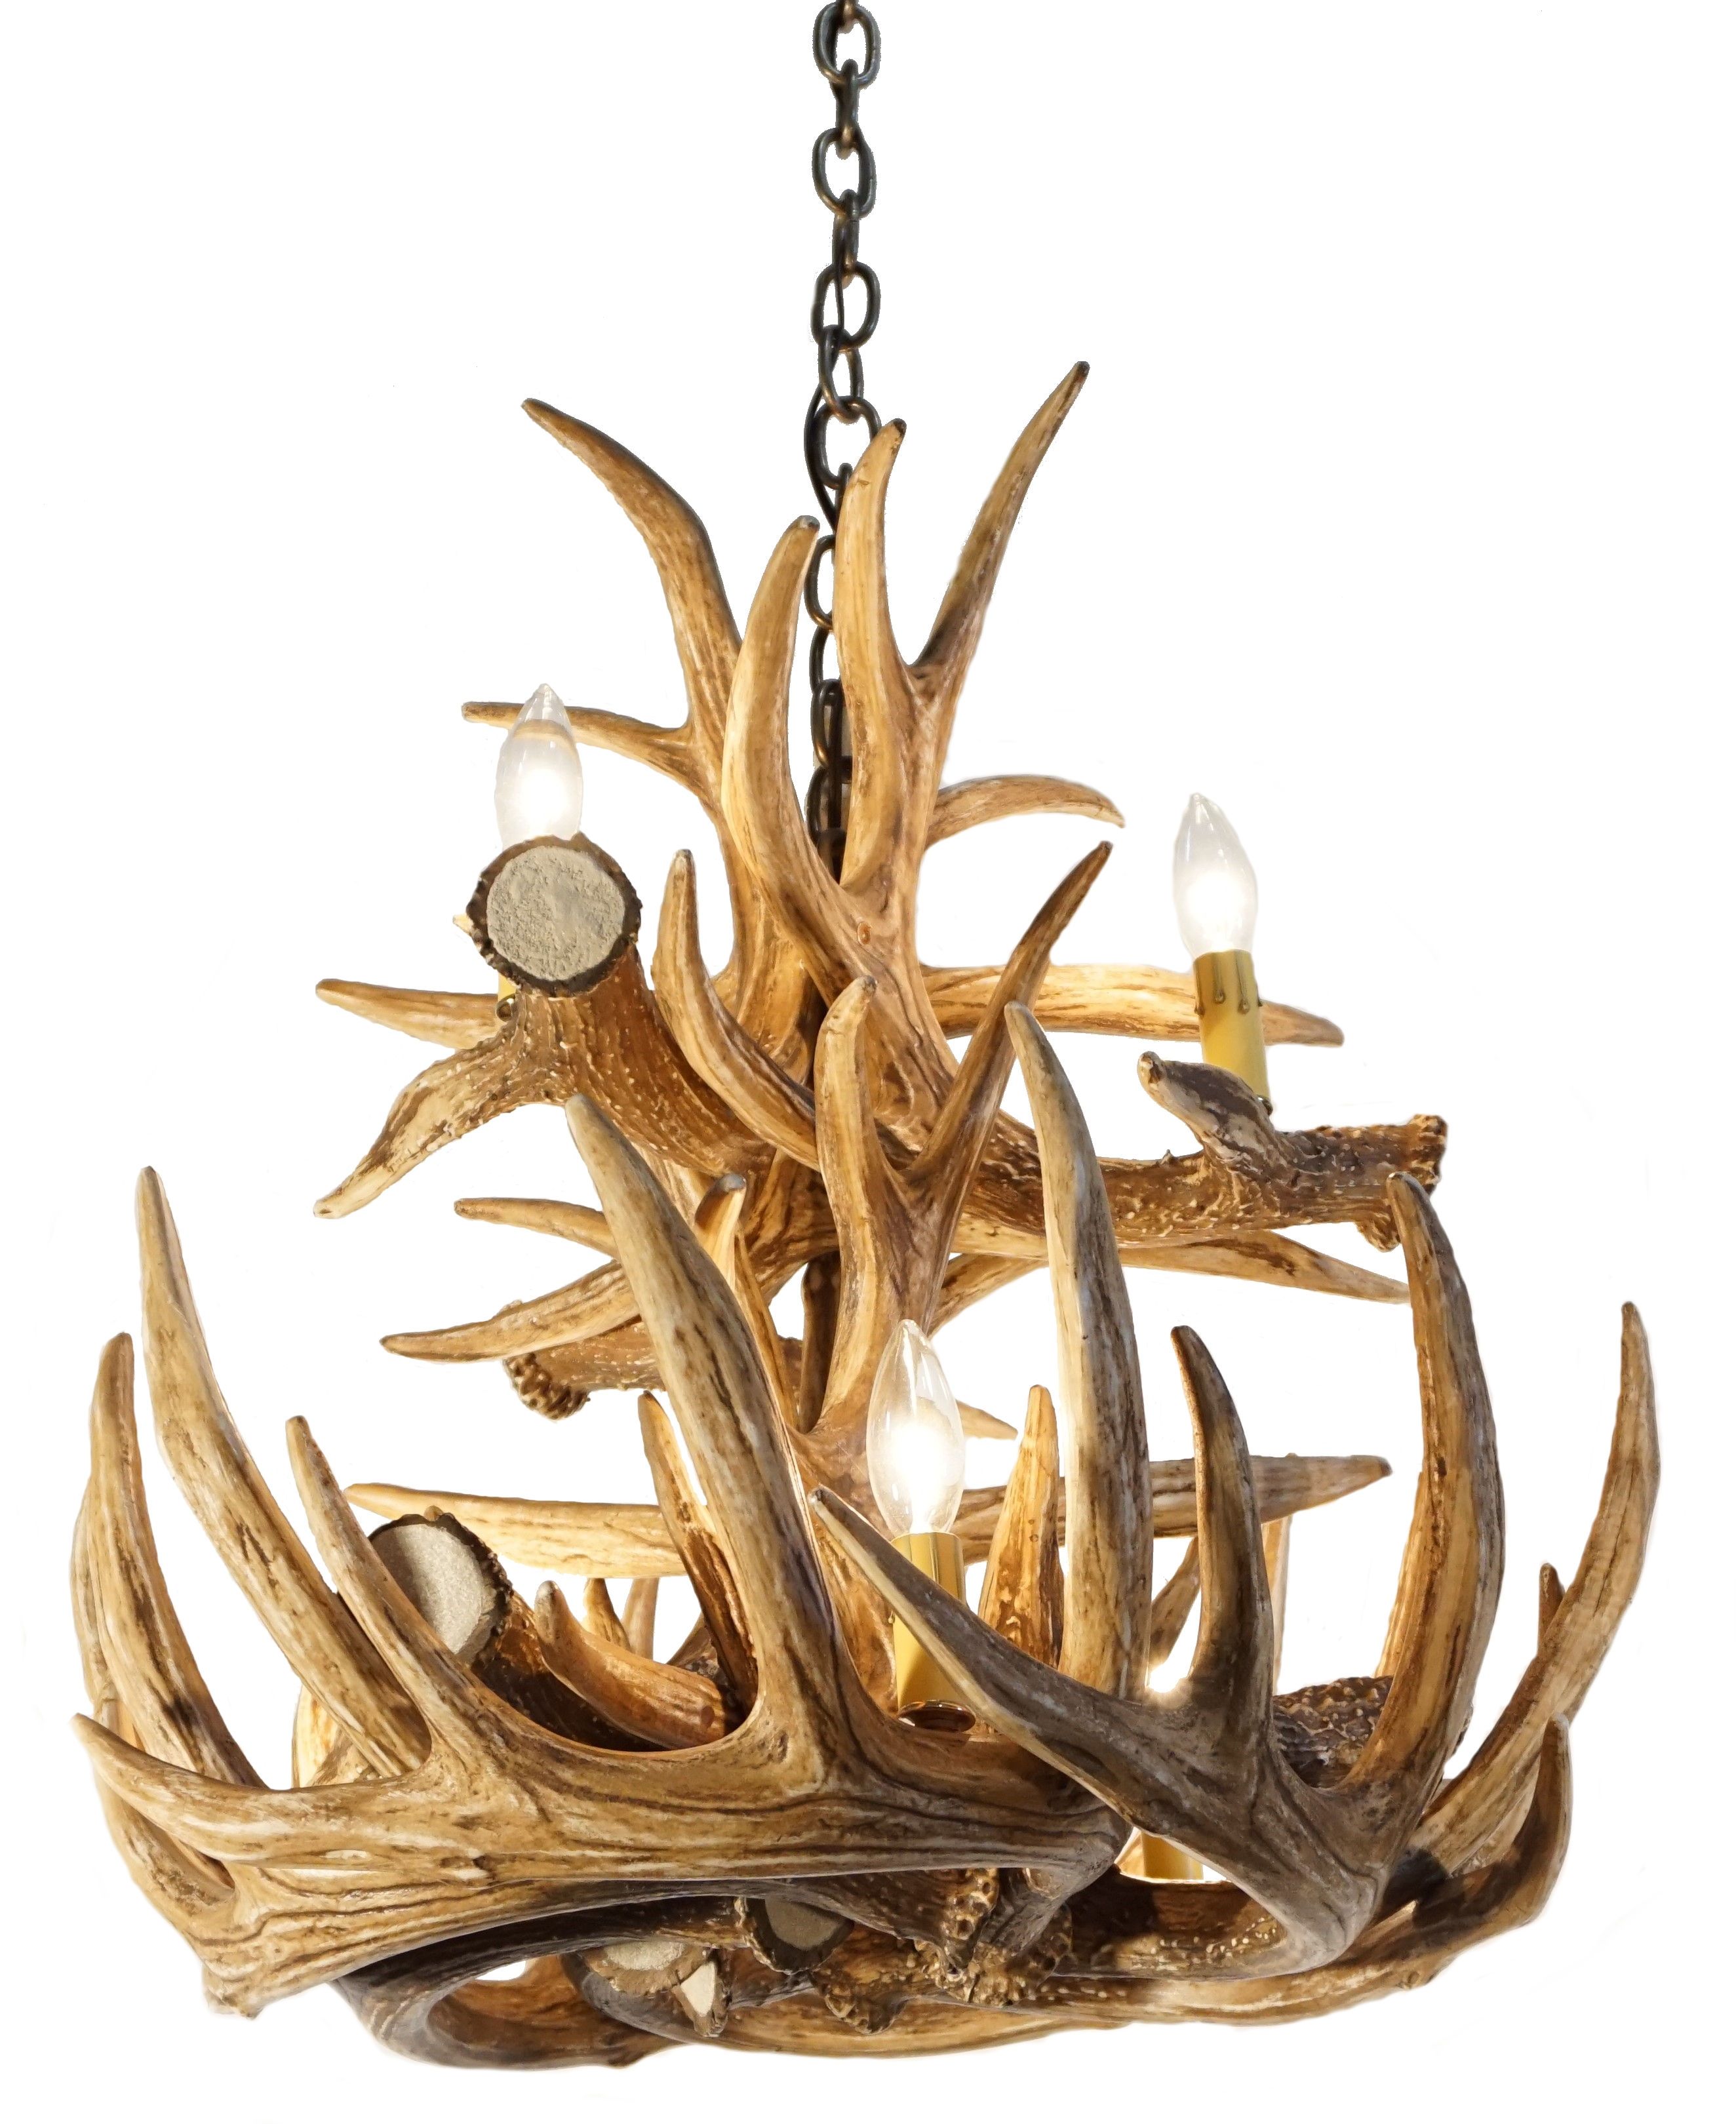 Whitetail Deer 12 Large Antler Chandelier Cast Horn Designs Throughout Antler Chandeliers (View 6 of 12)